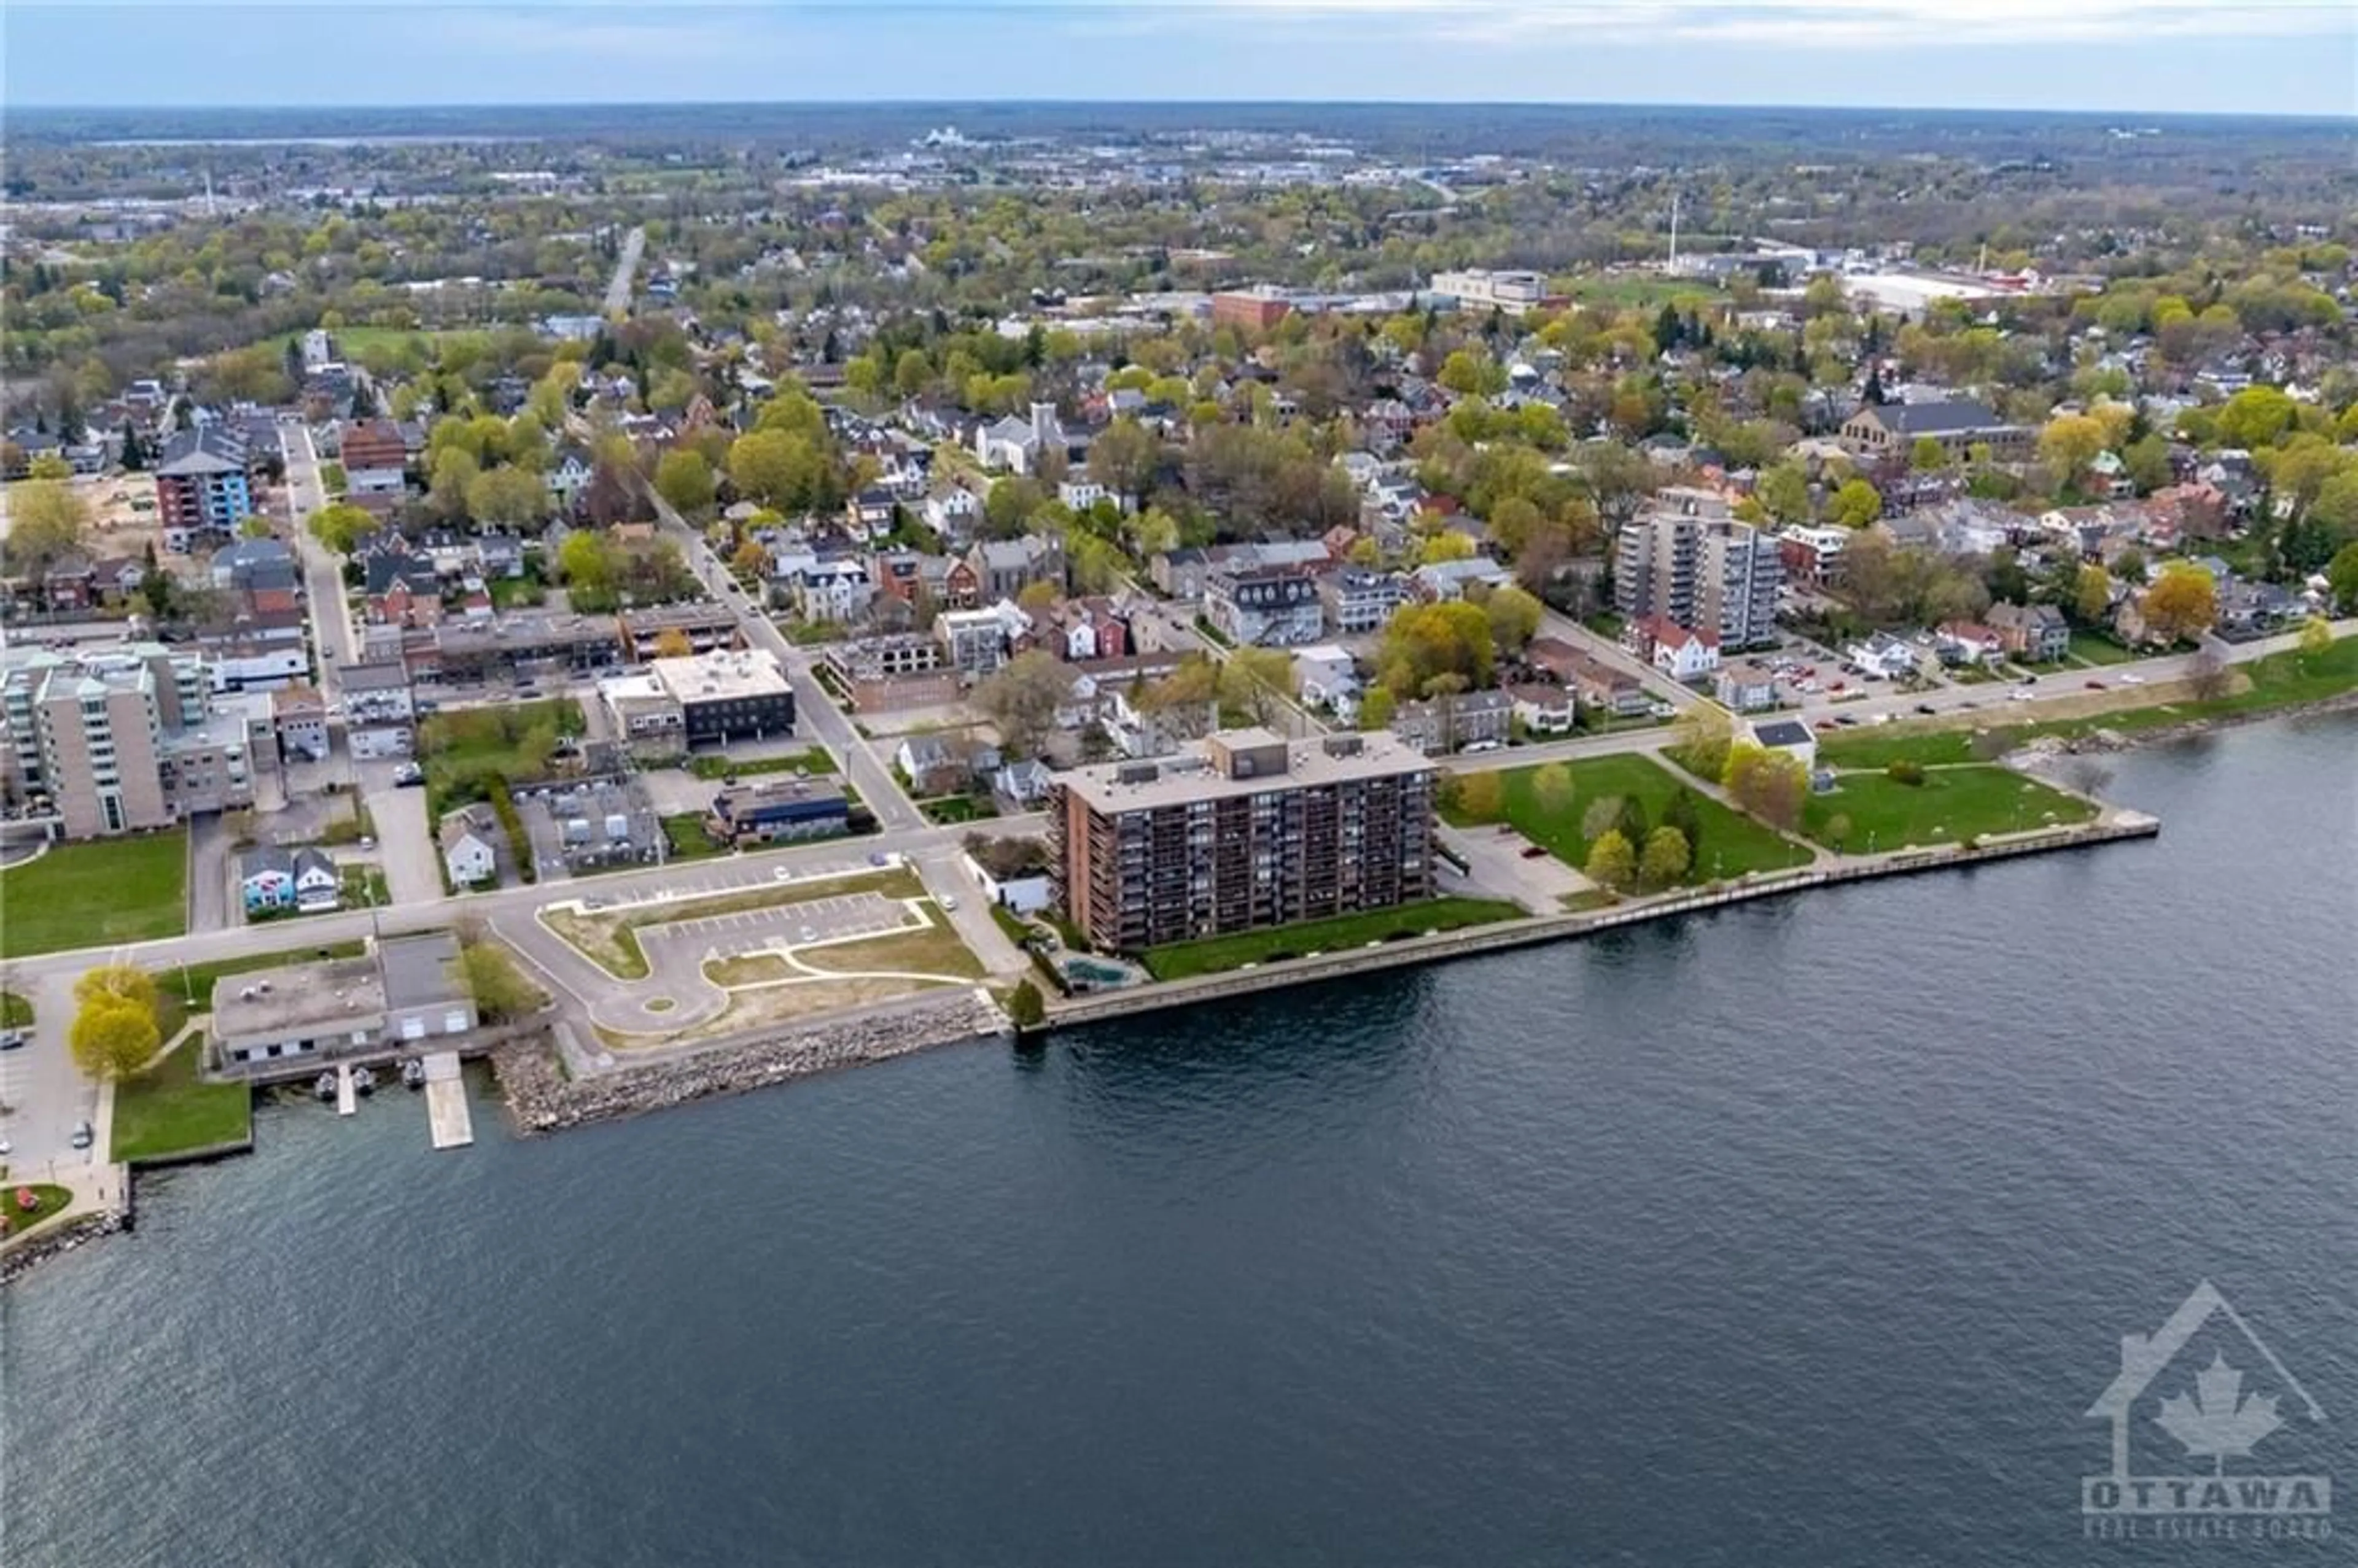 Lakeview for 55 WATER St #609, Brockville Ontario K6V 1A3